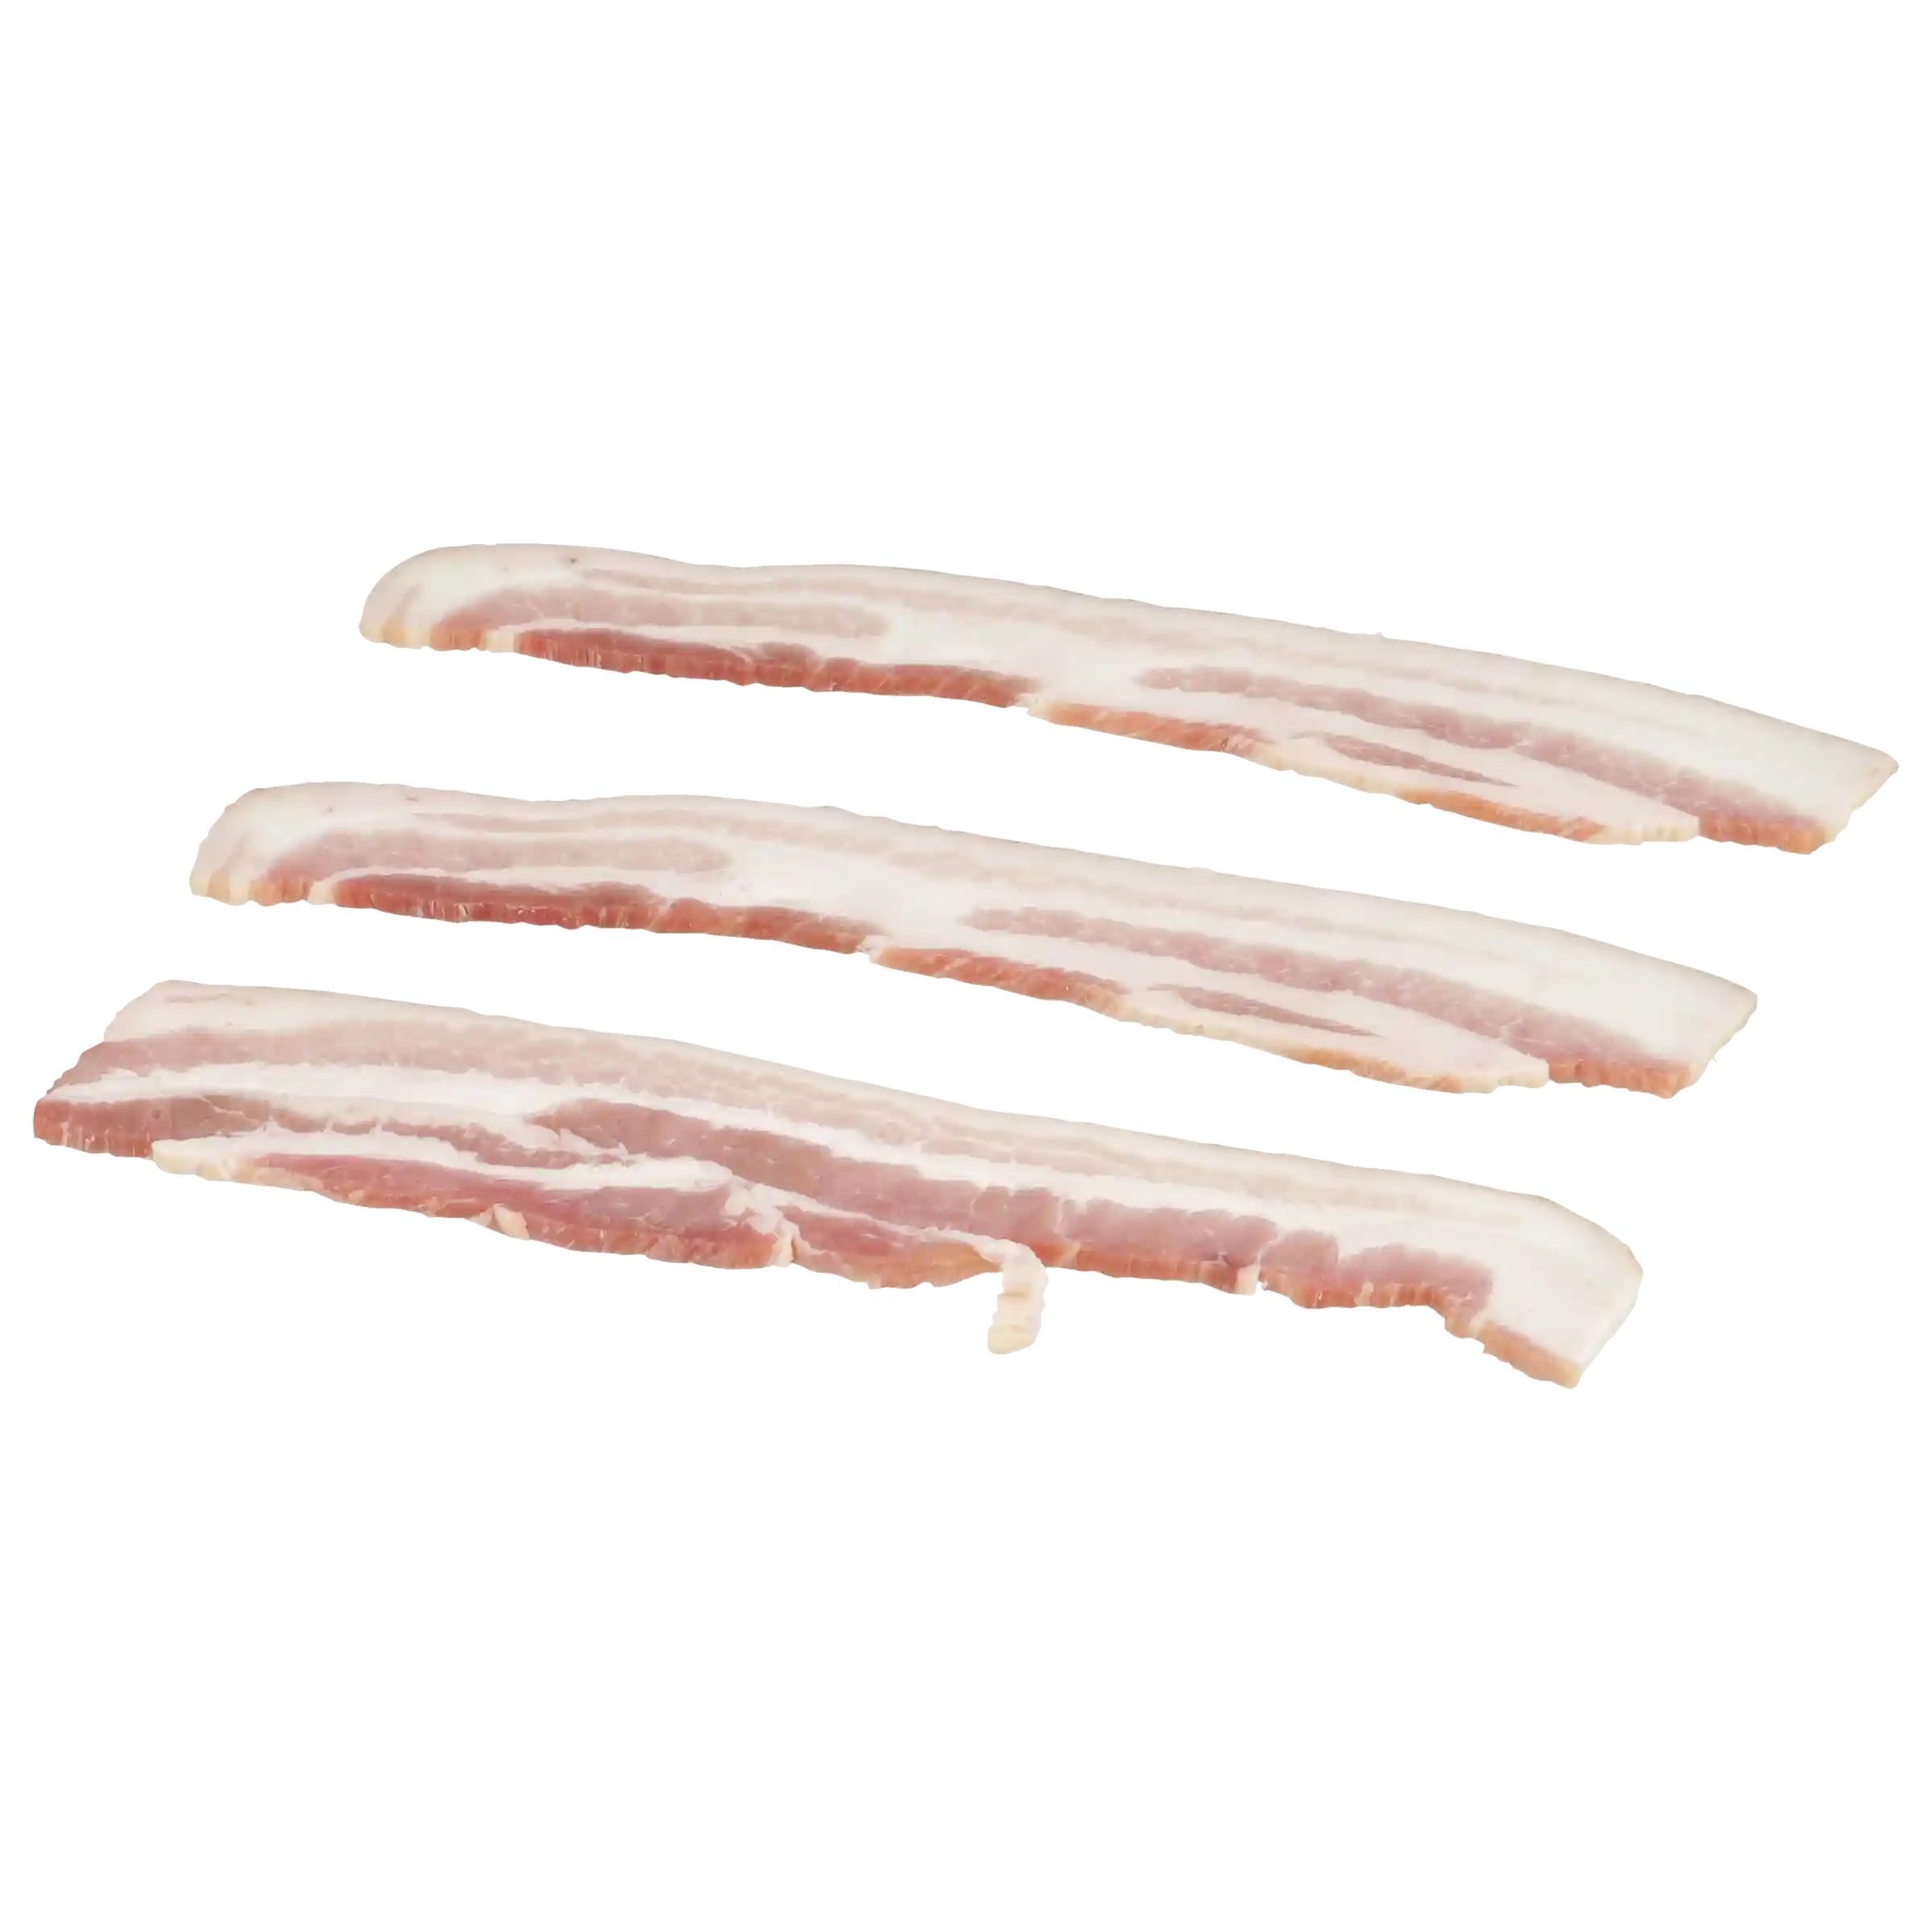 Wright® Brand Naturally Hickory Smoked Thick Sliced Bacon, Flat-Pack®, 15 Lbs, 10-14 Slices per Pound, Frozen_image_11